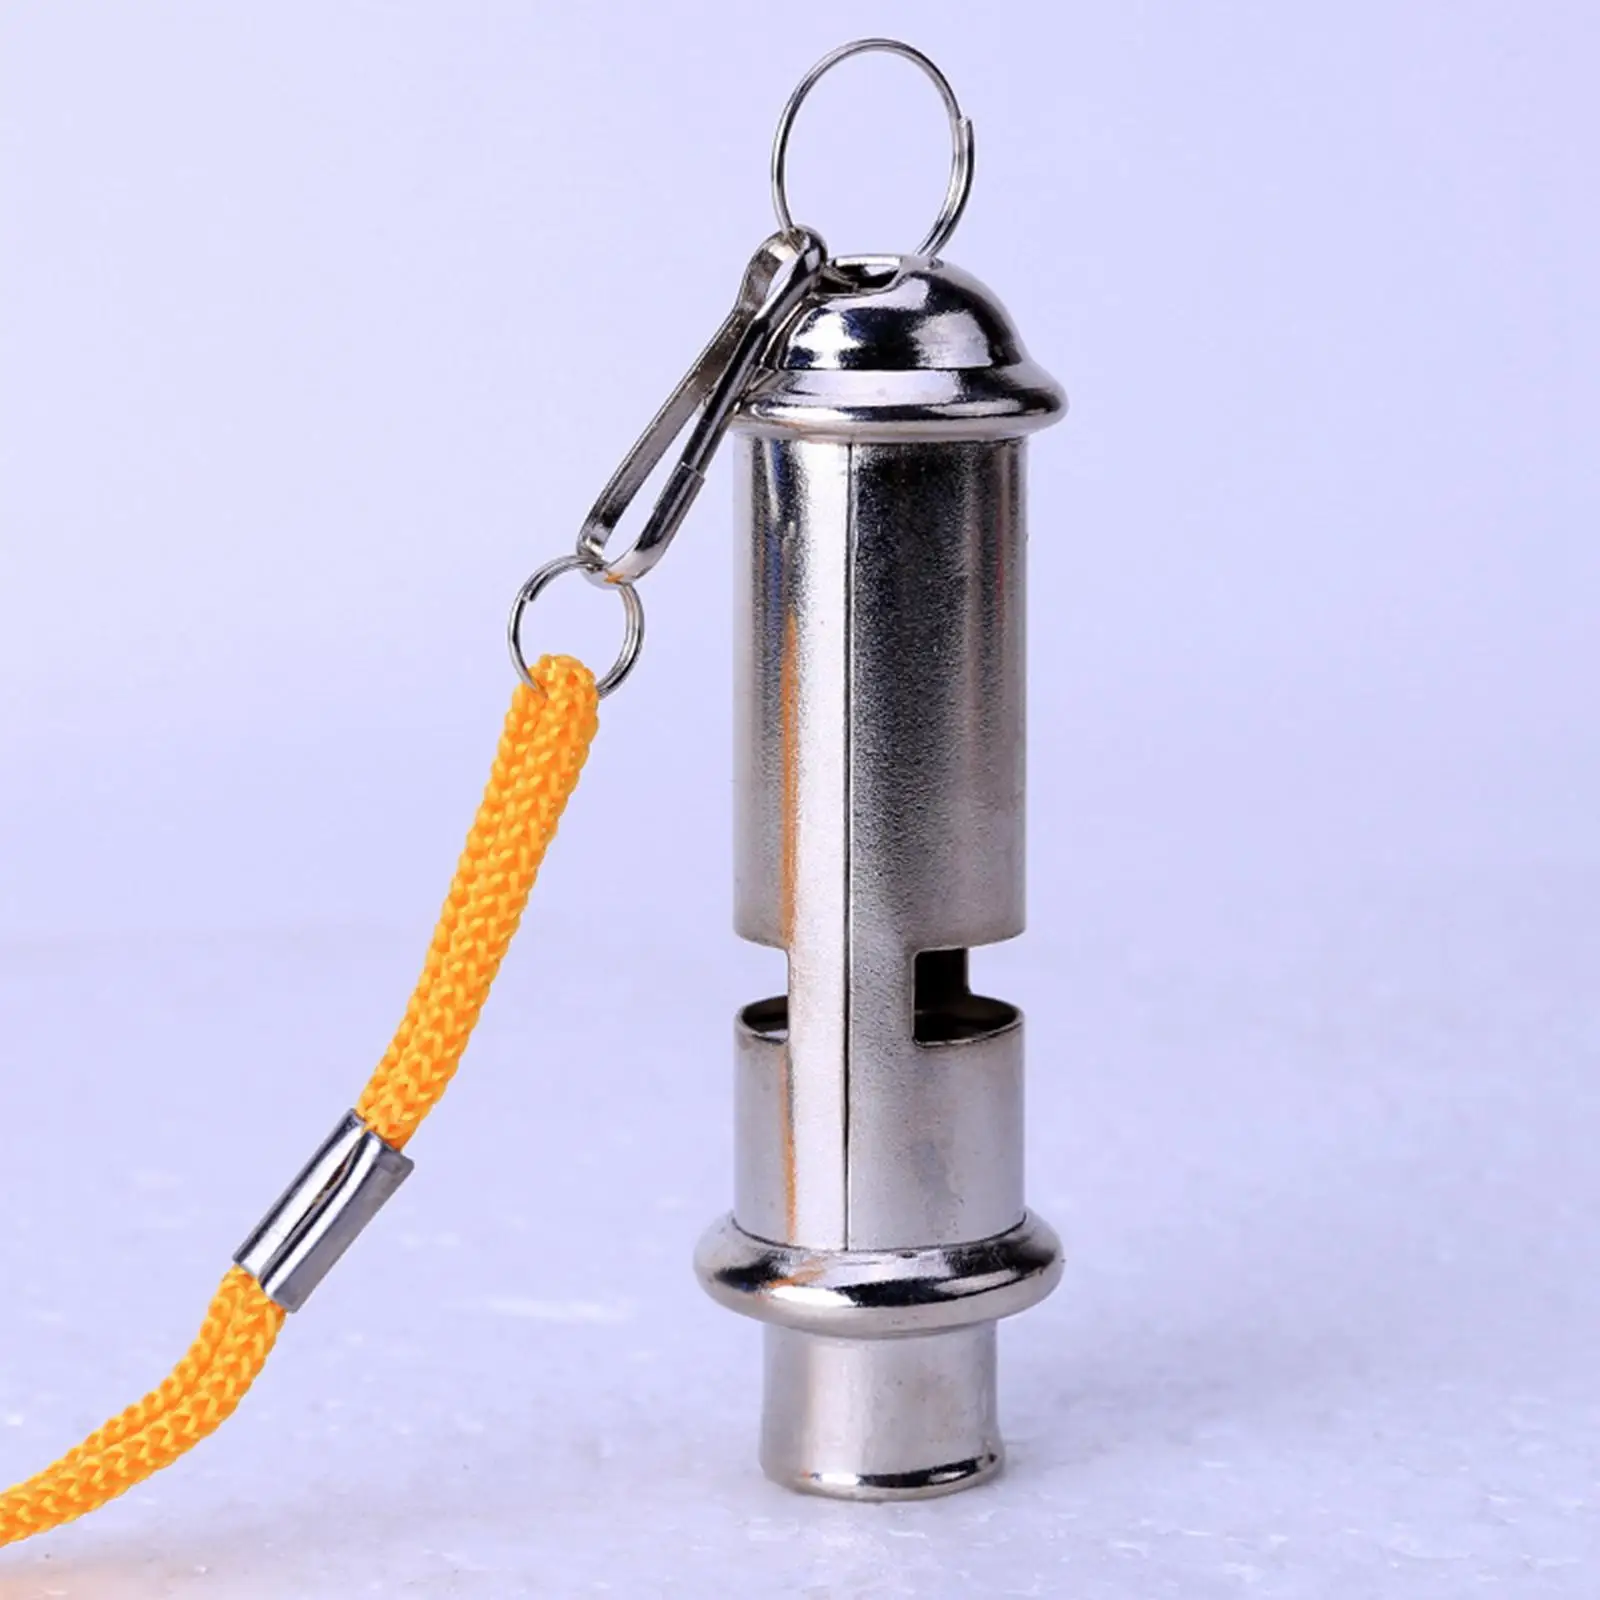 Survival Whistle Attachment Training Dog Portable Professional Equipment with Lanyard for Device Camping Emergency Trainer SOS